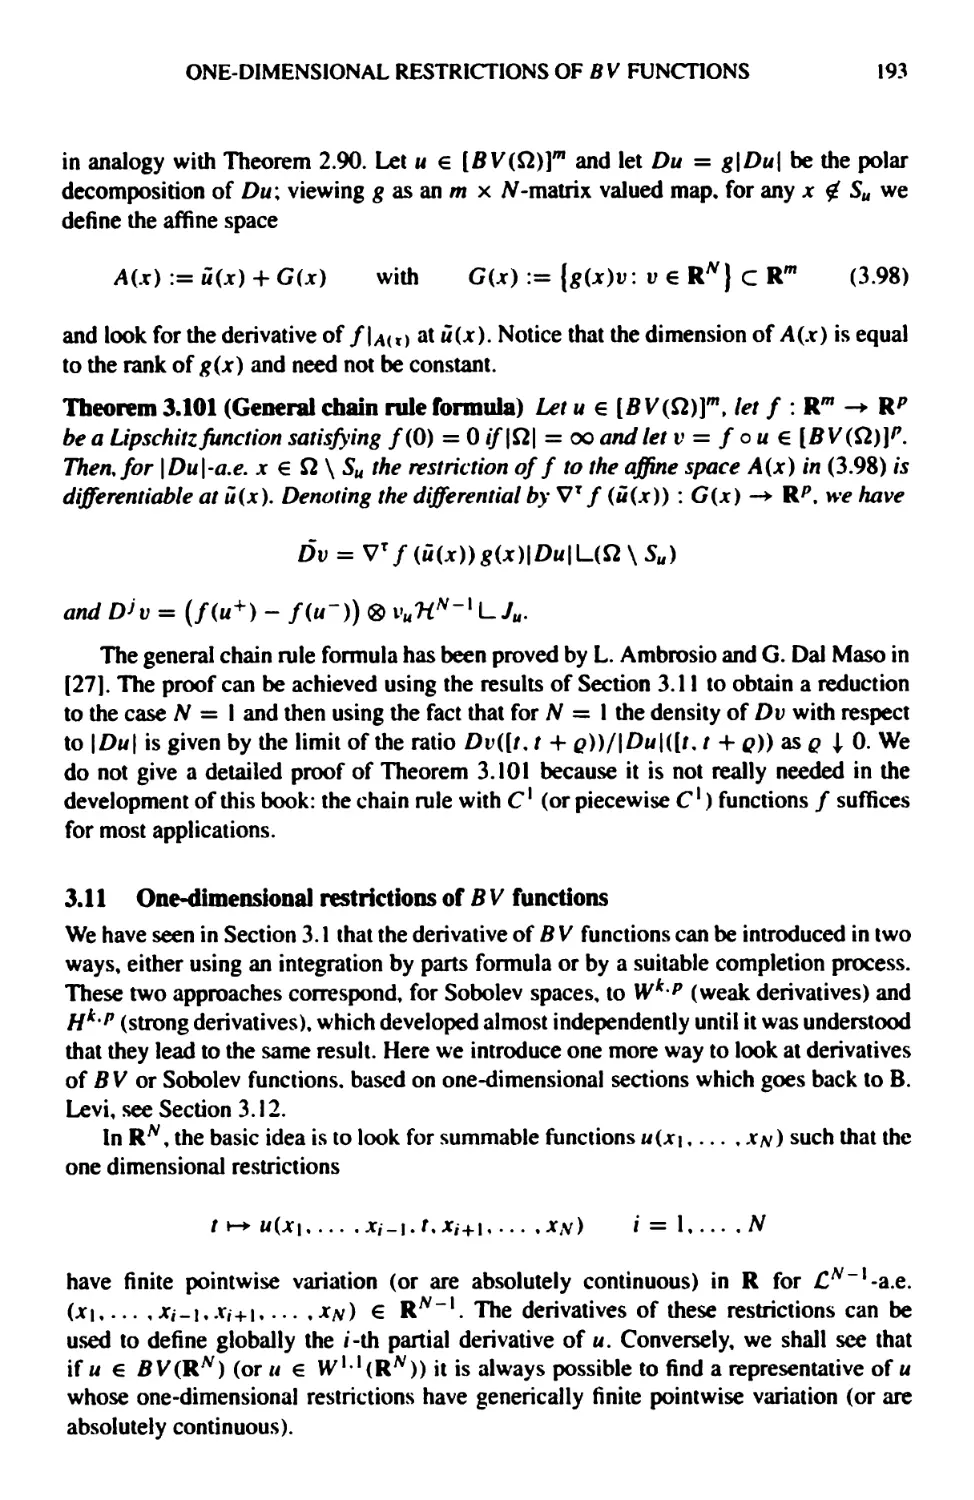 3.11 One-dimensional restrictions of BV functions